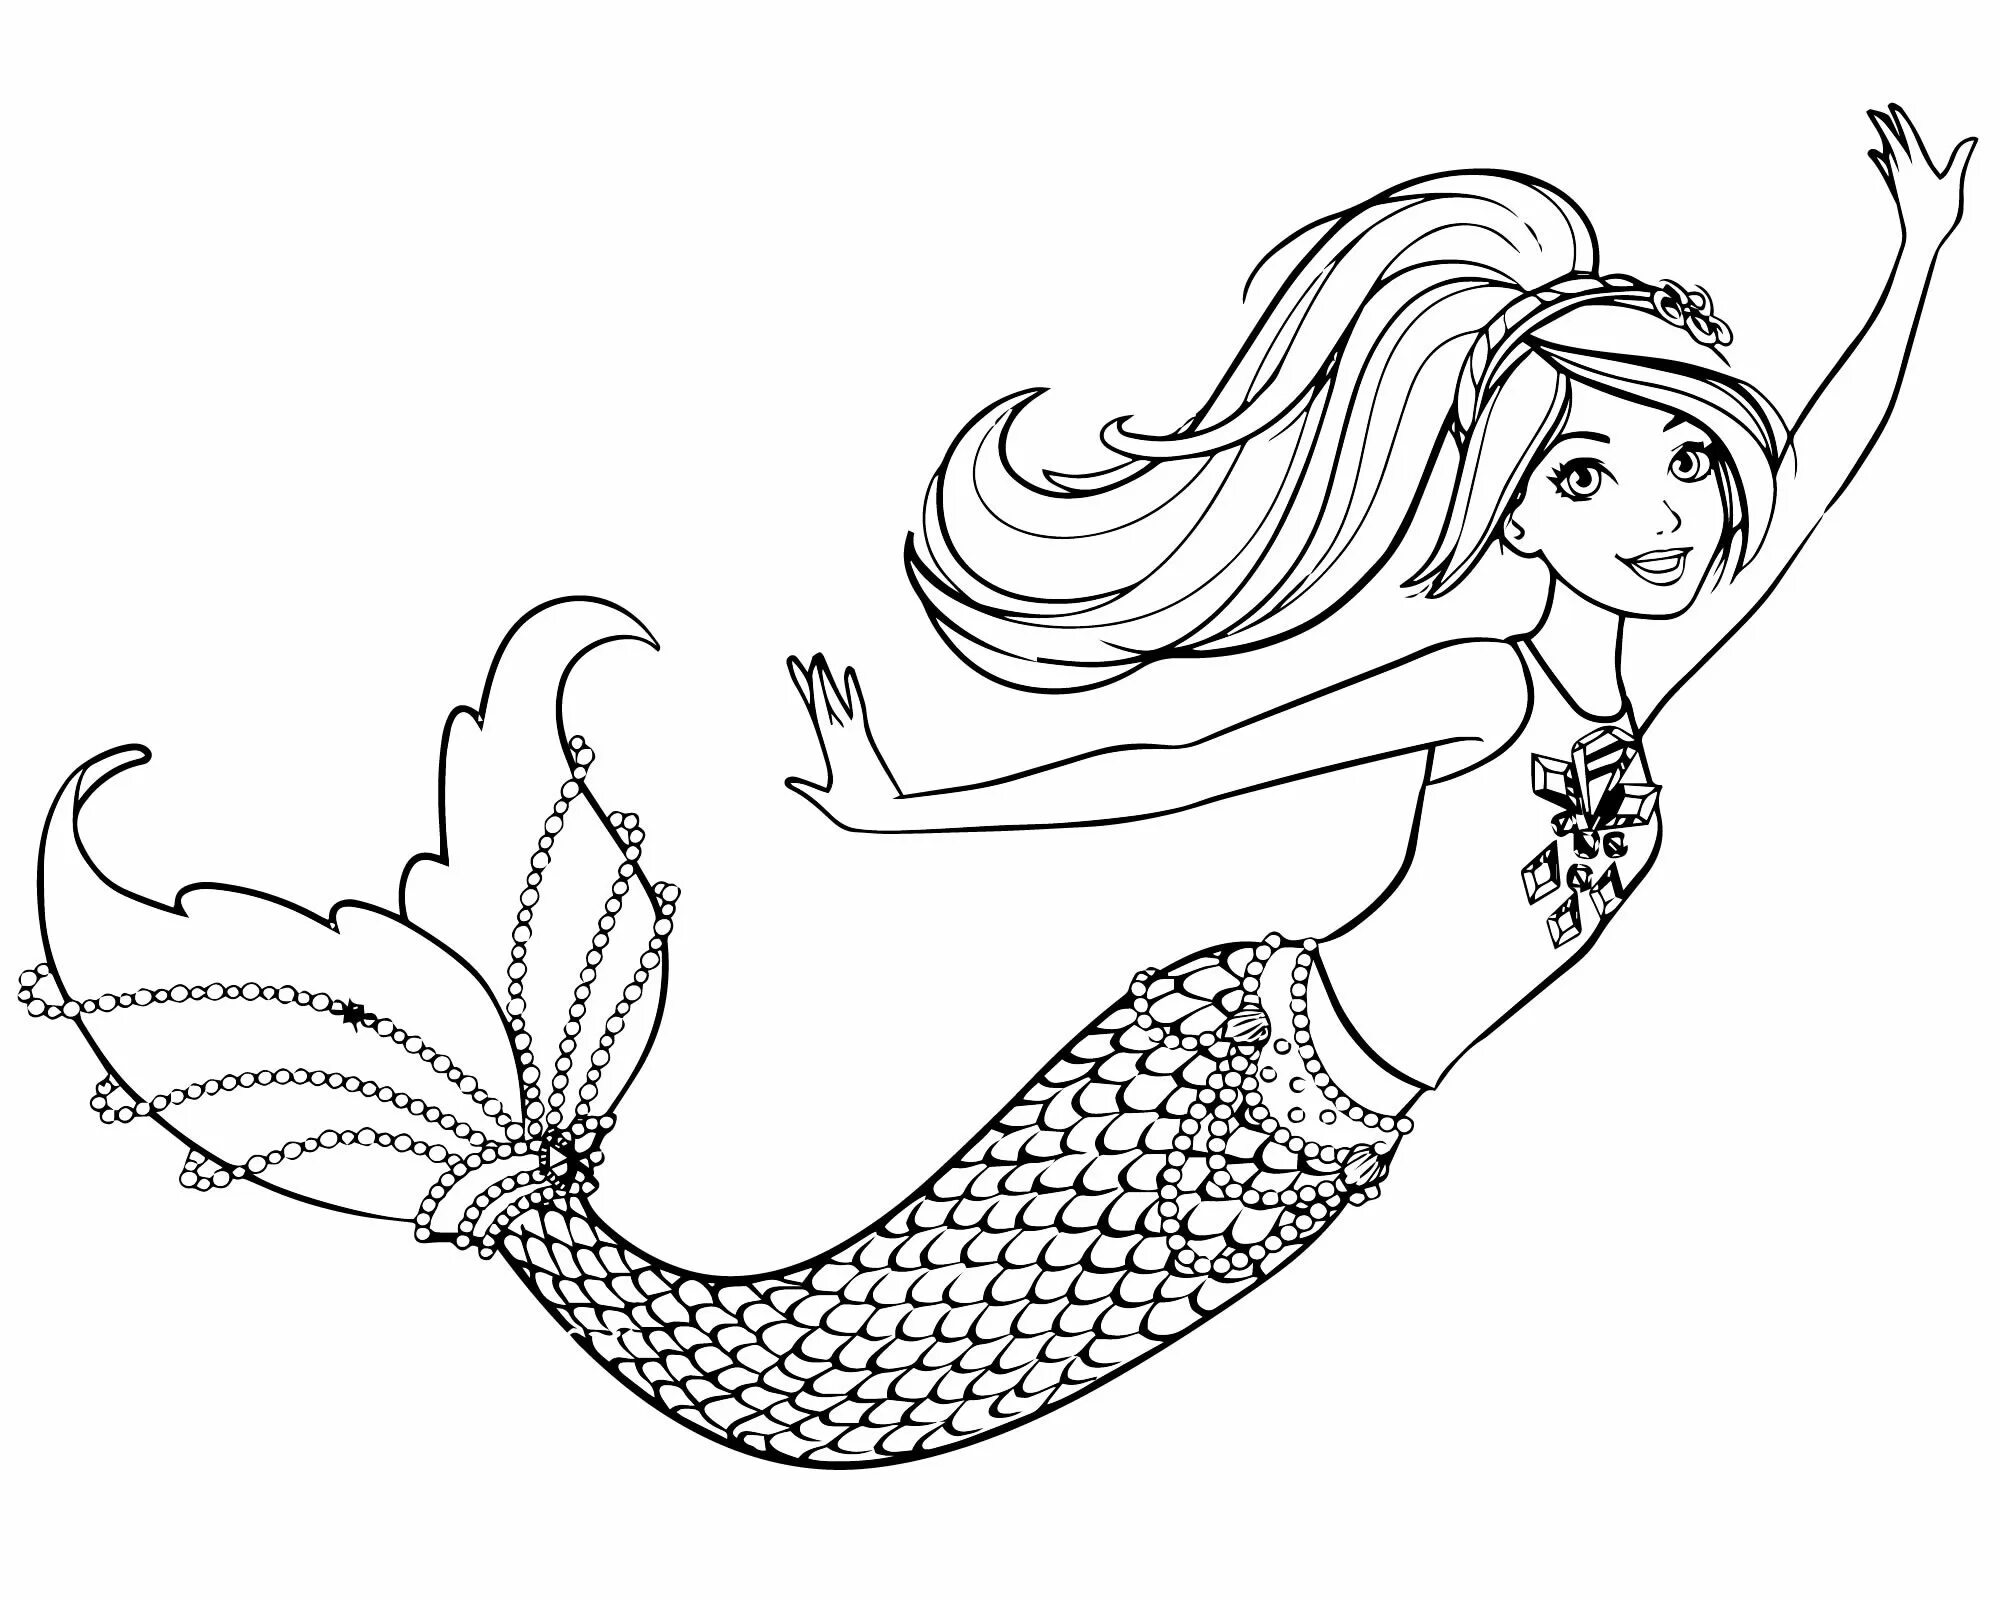 Radiant coloring page drawing of a mermaid